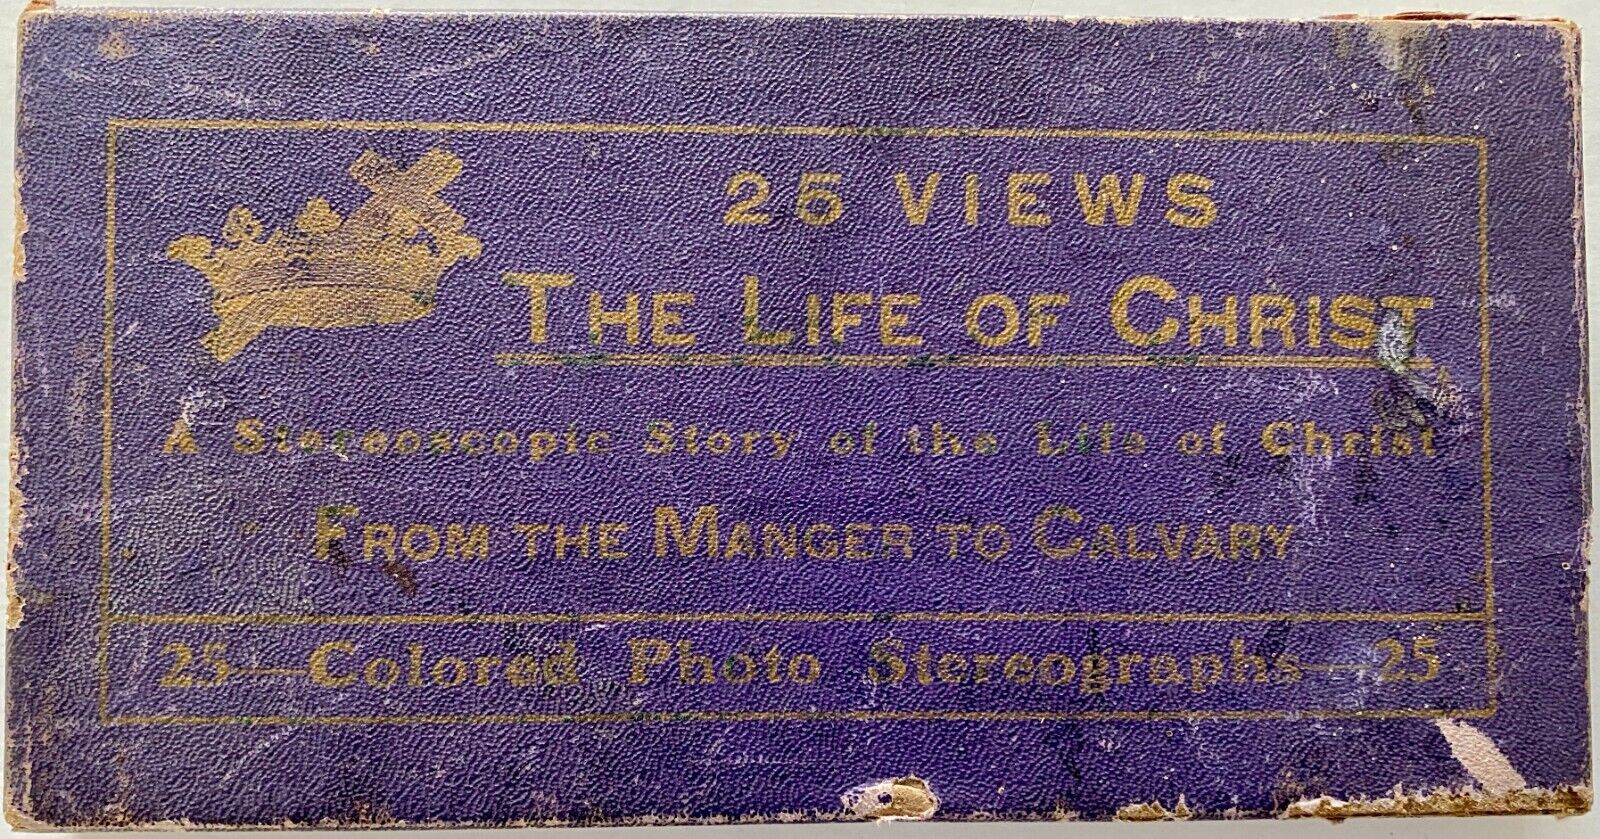 STEREOVIEWS, Lot of 25, Life of Christ, From The Manger To Calvary